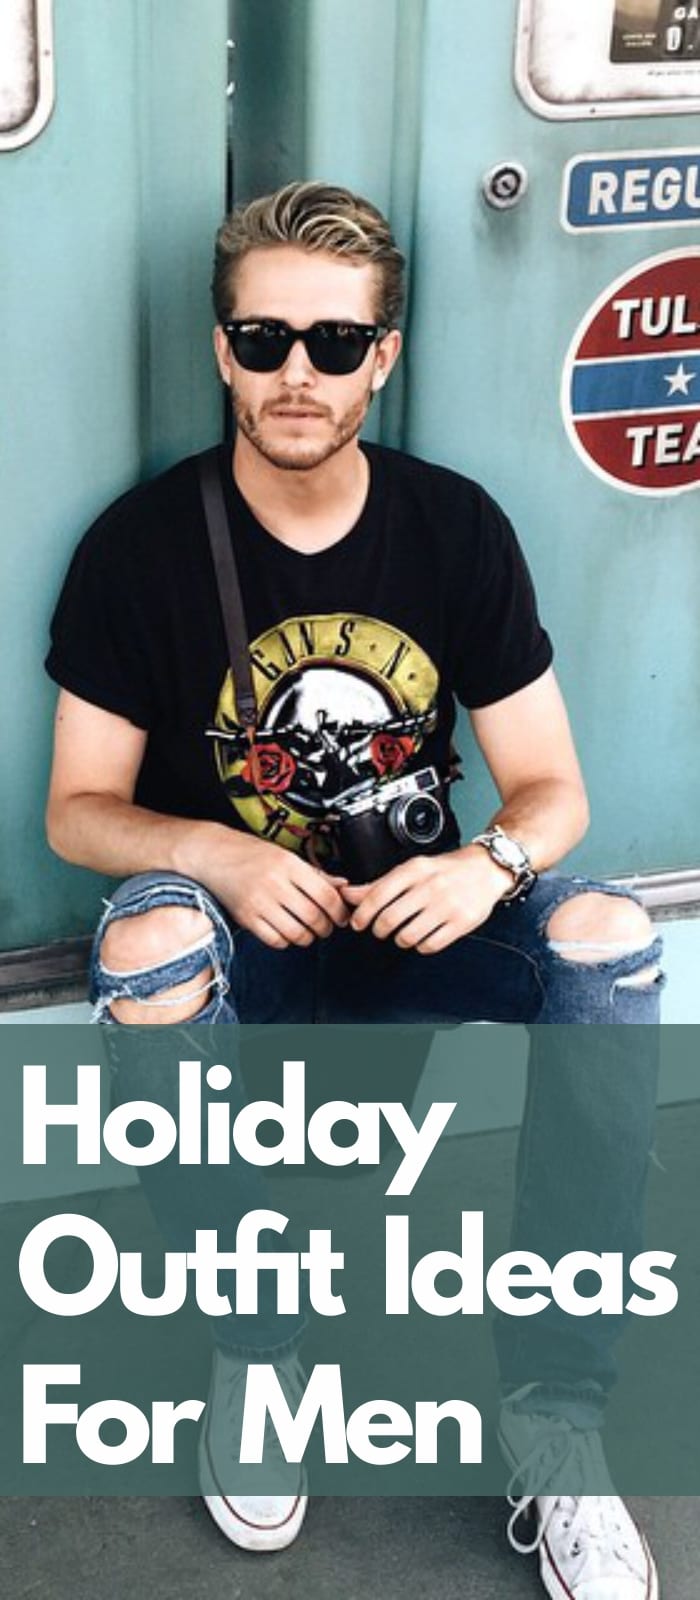 15 Holiday Outfit Ideas For Men On Budget